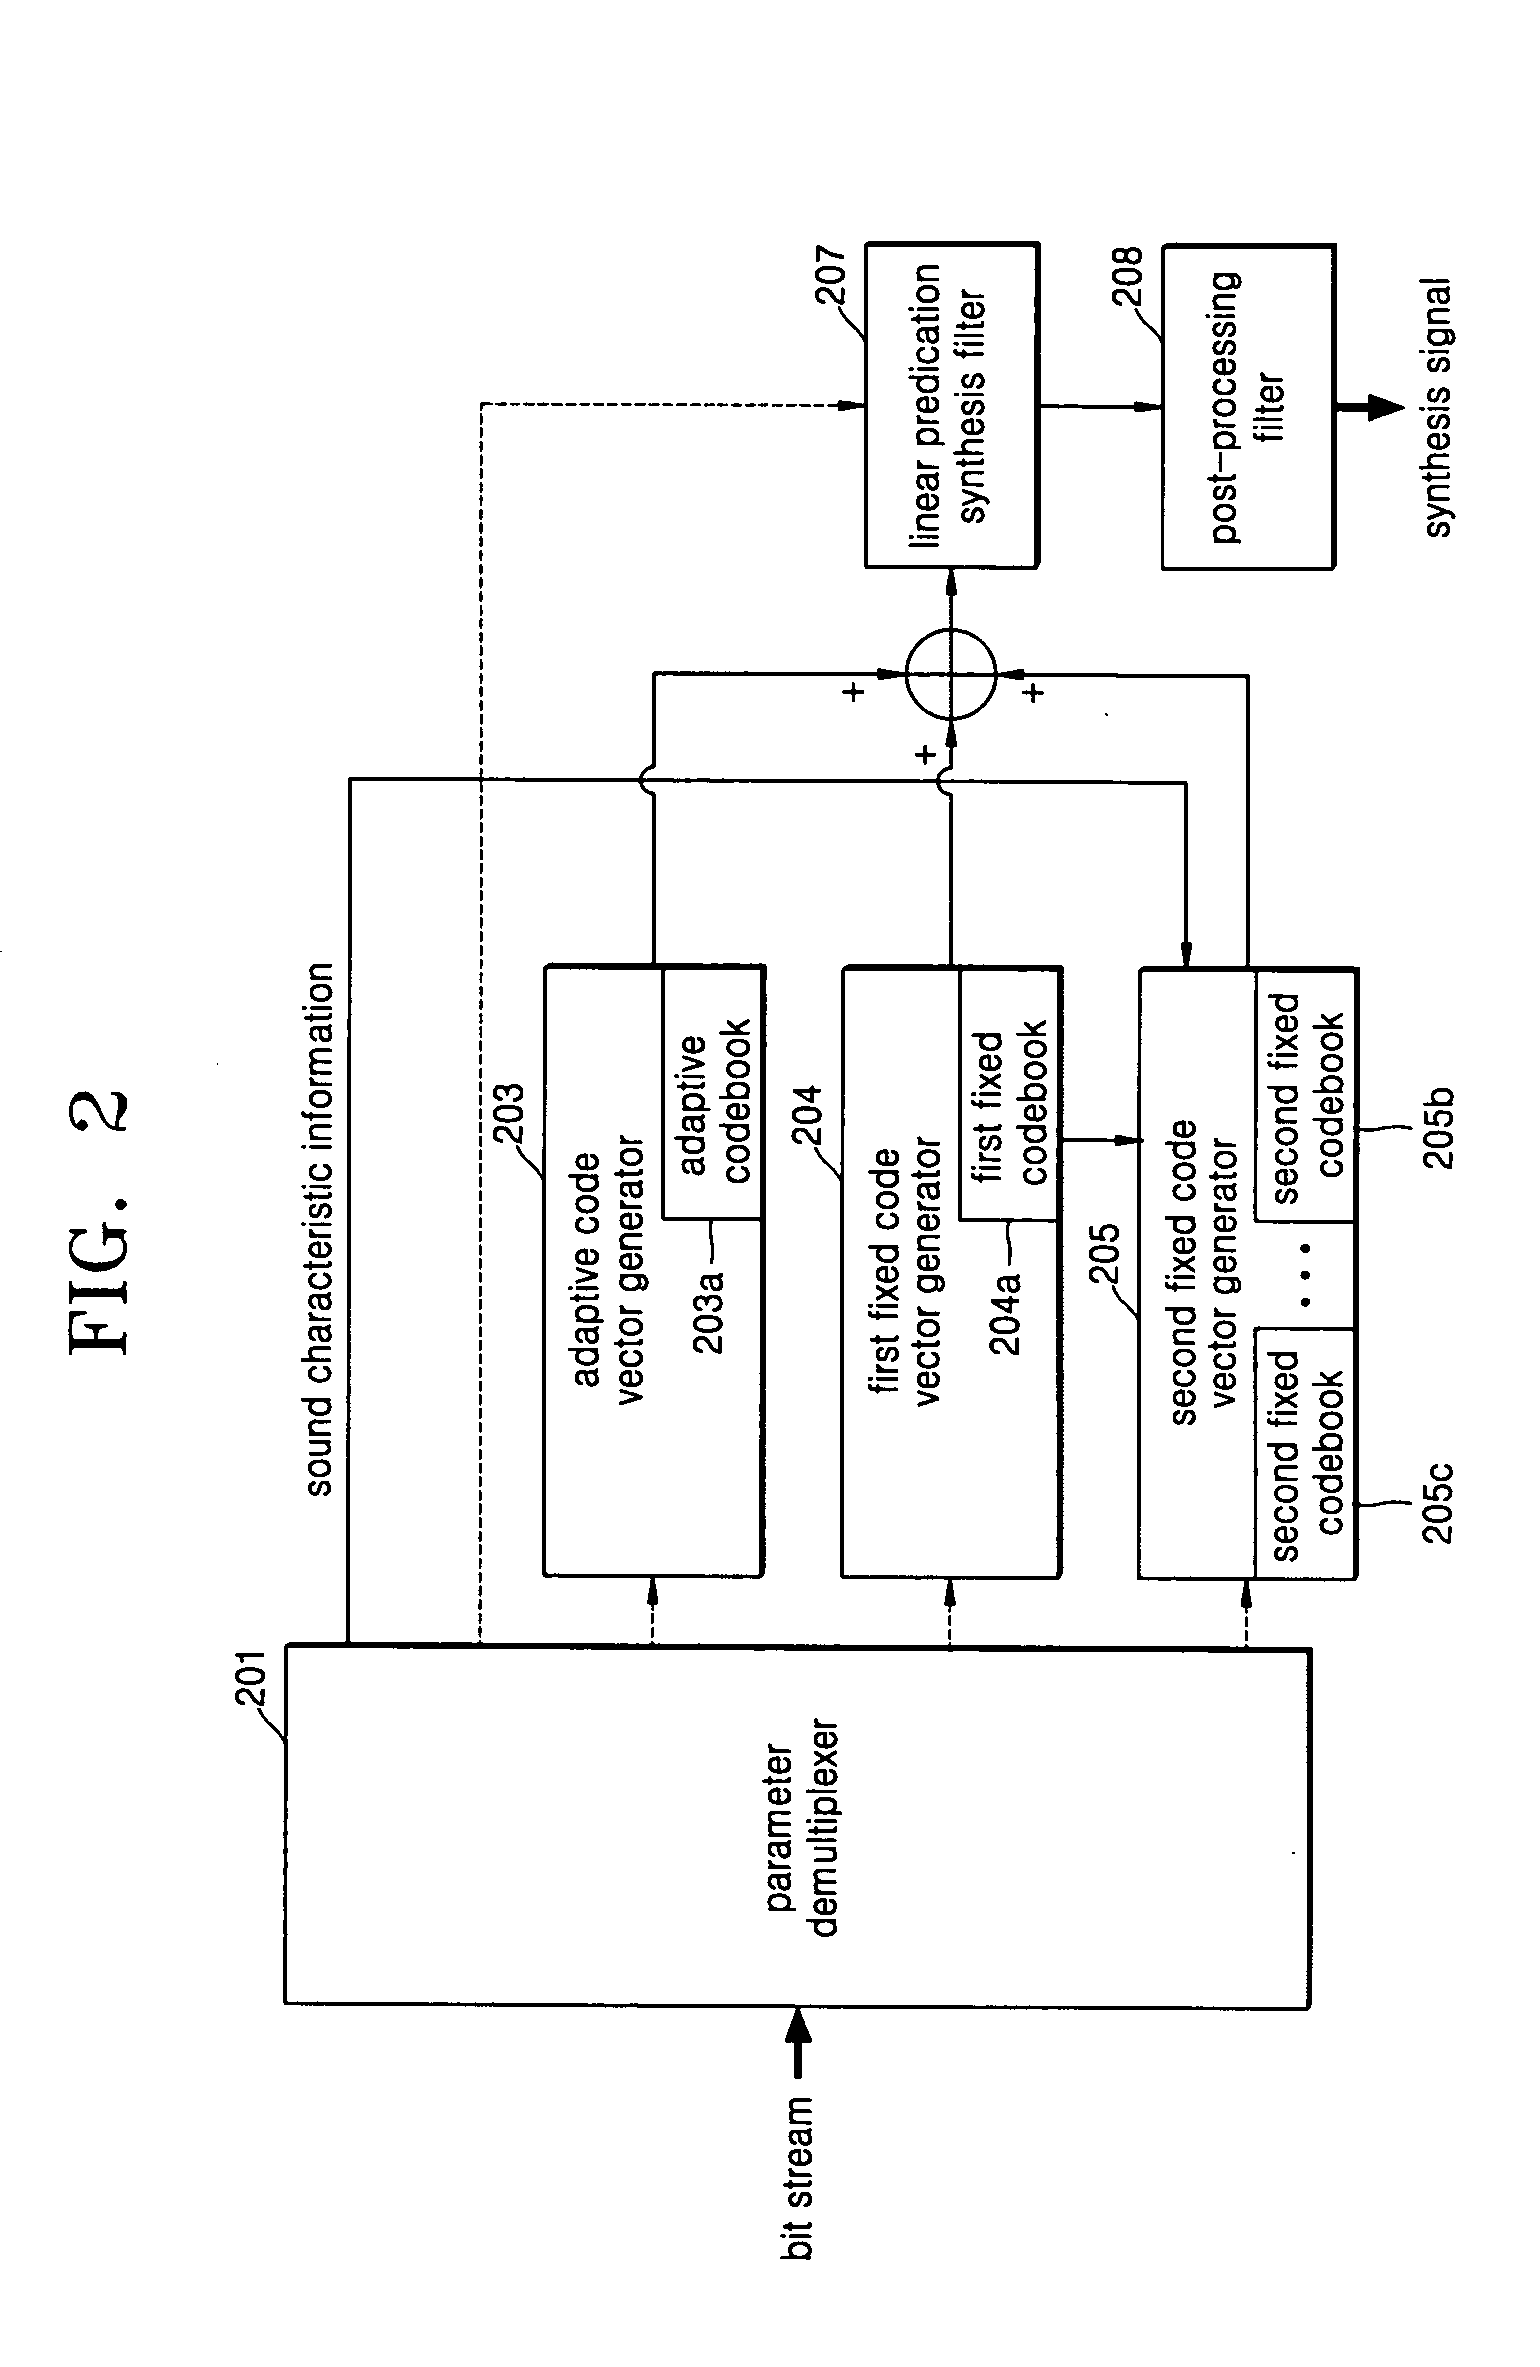 Wide-band speech coder/decoder and method thereof